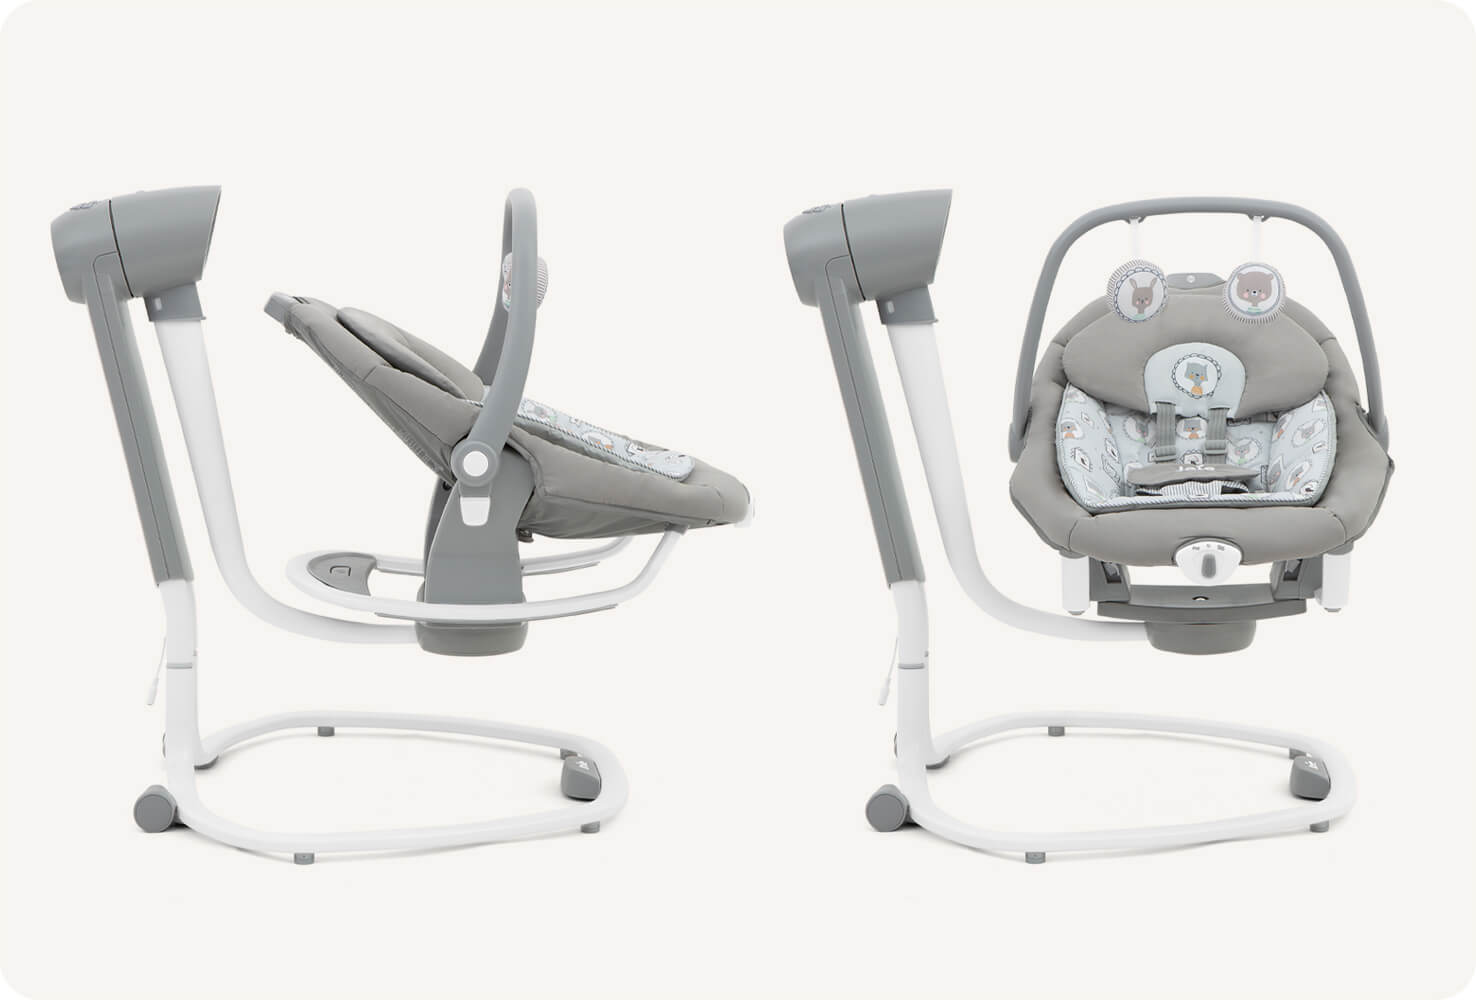 Two light gray patterned Joie serina 2in1 swings side by side. One is a frontal view, and the other is a side profile of the swing.